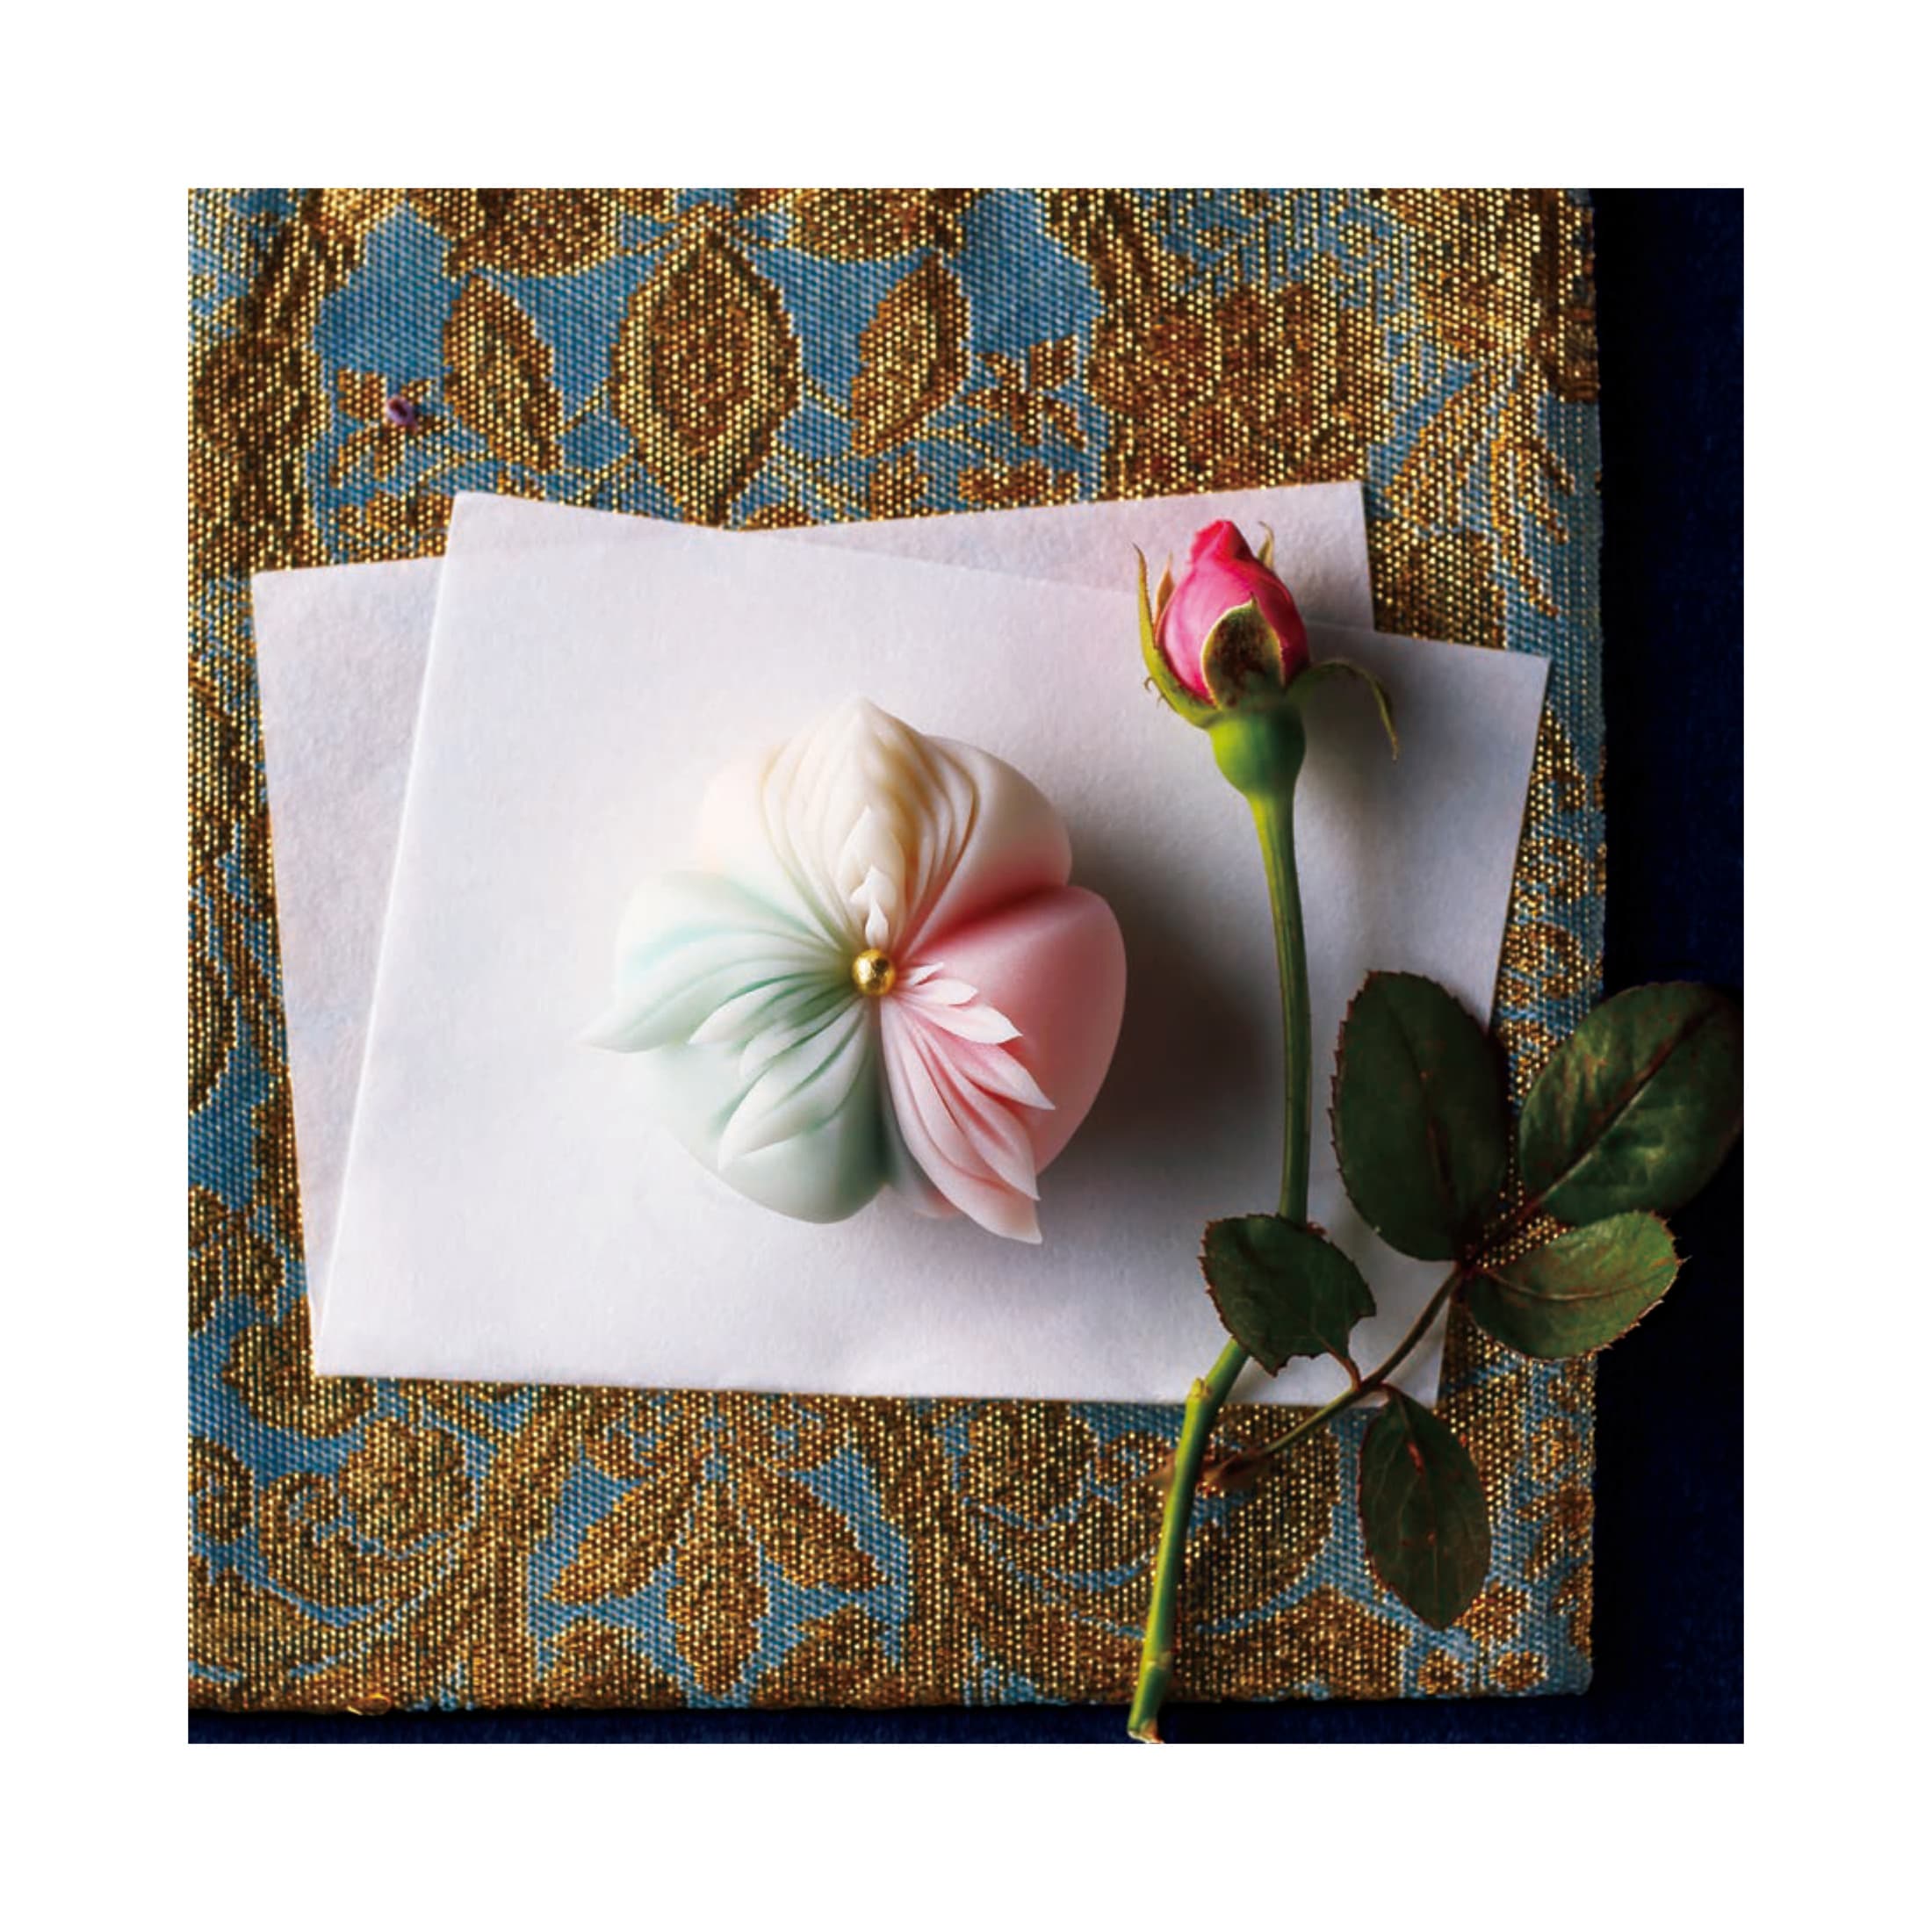 This wagashi was inspired by France. It symbolizes the national motto of “Liberty, equality, fraternity”